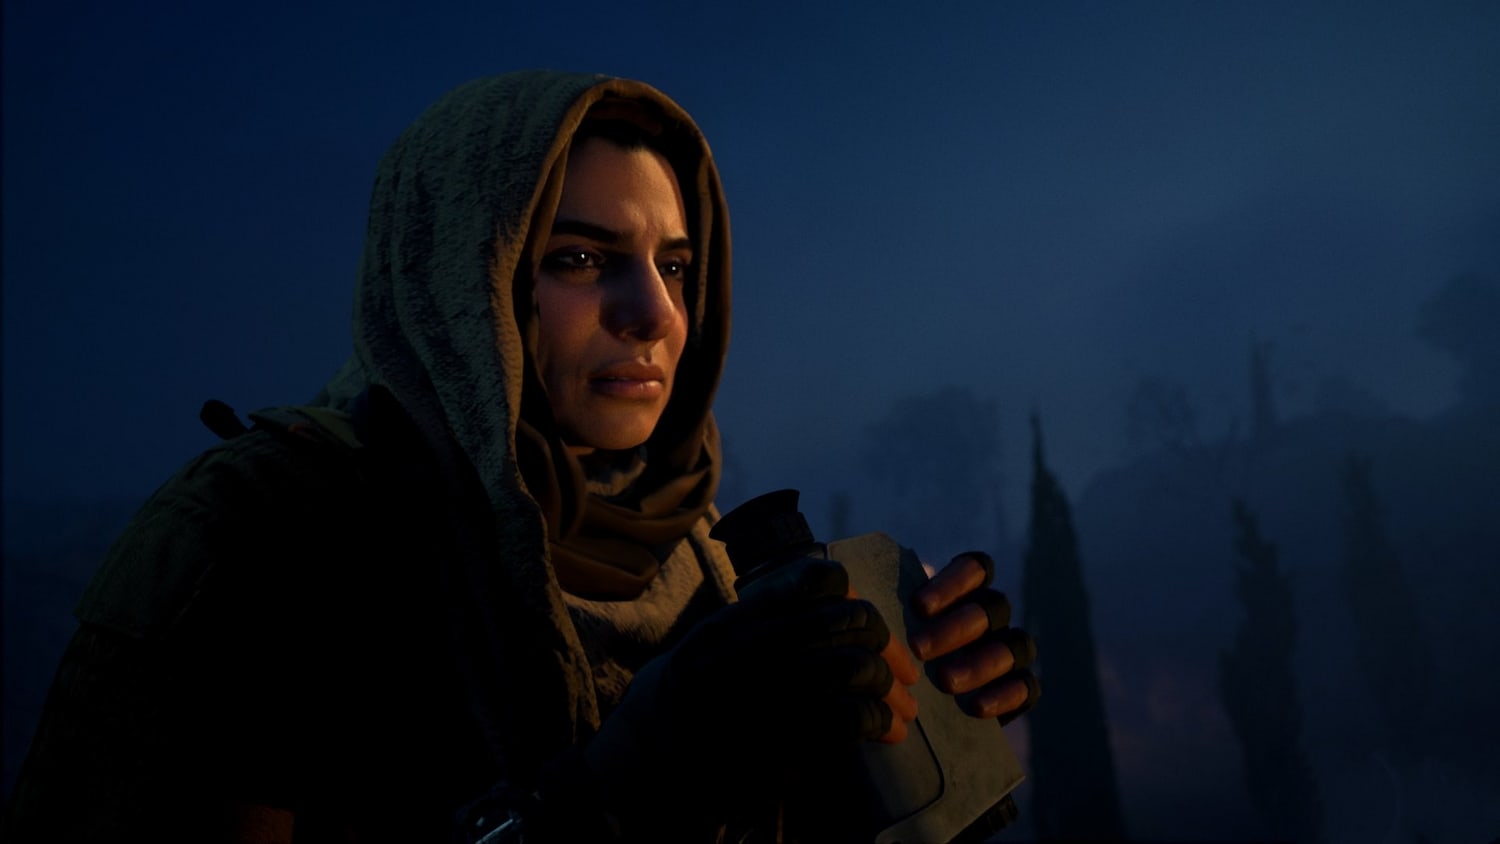 A character from the MW3 cast, a woman in a hoodie, is holding a gun.